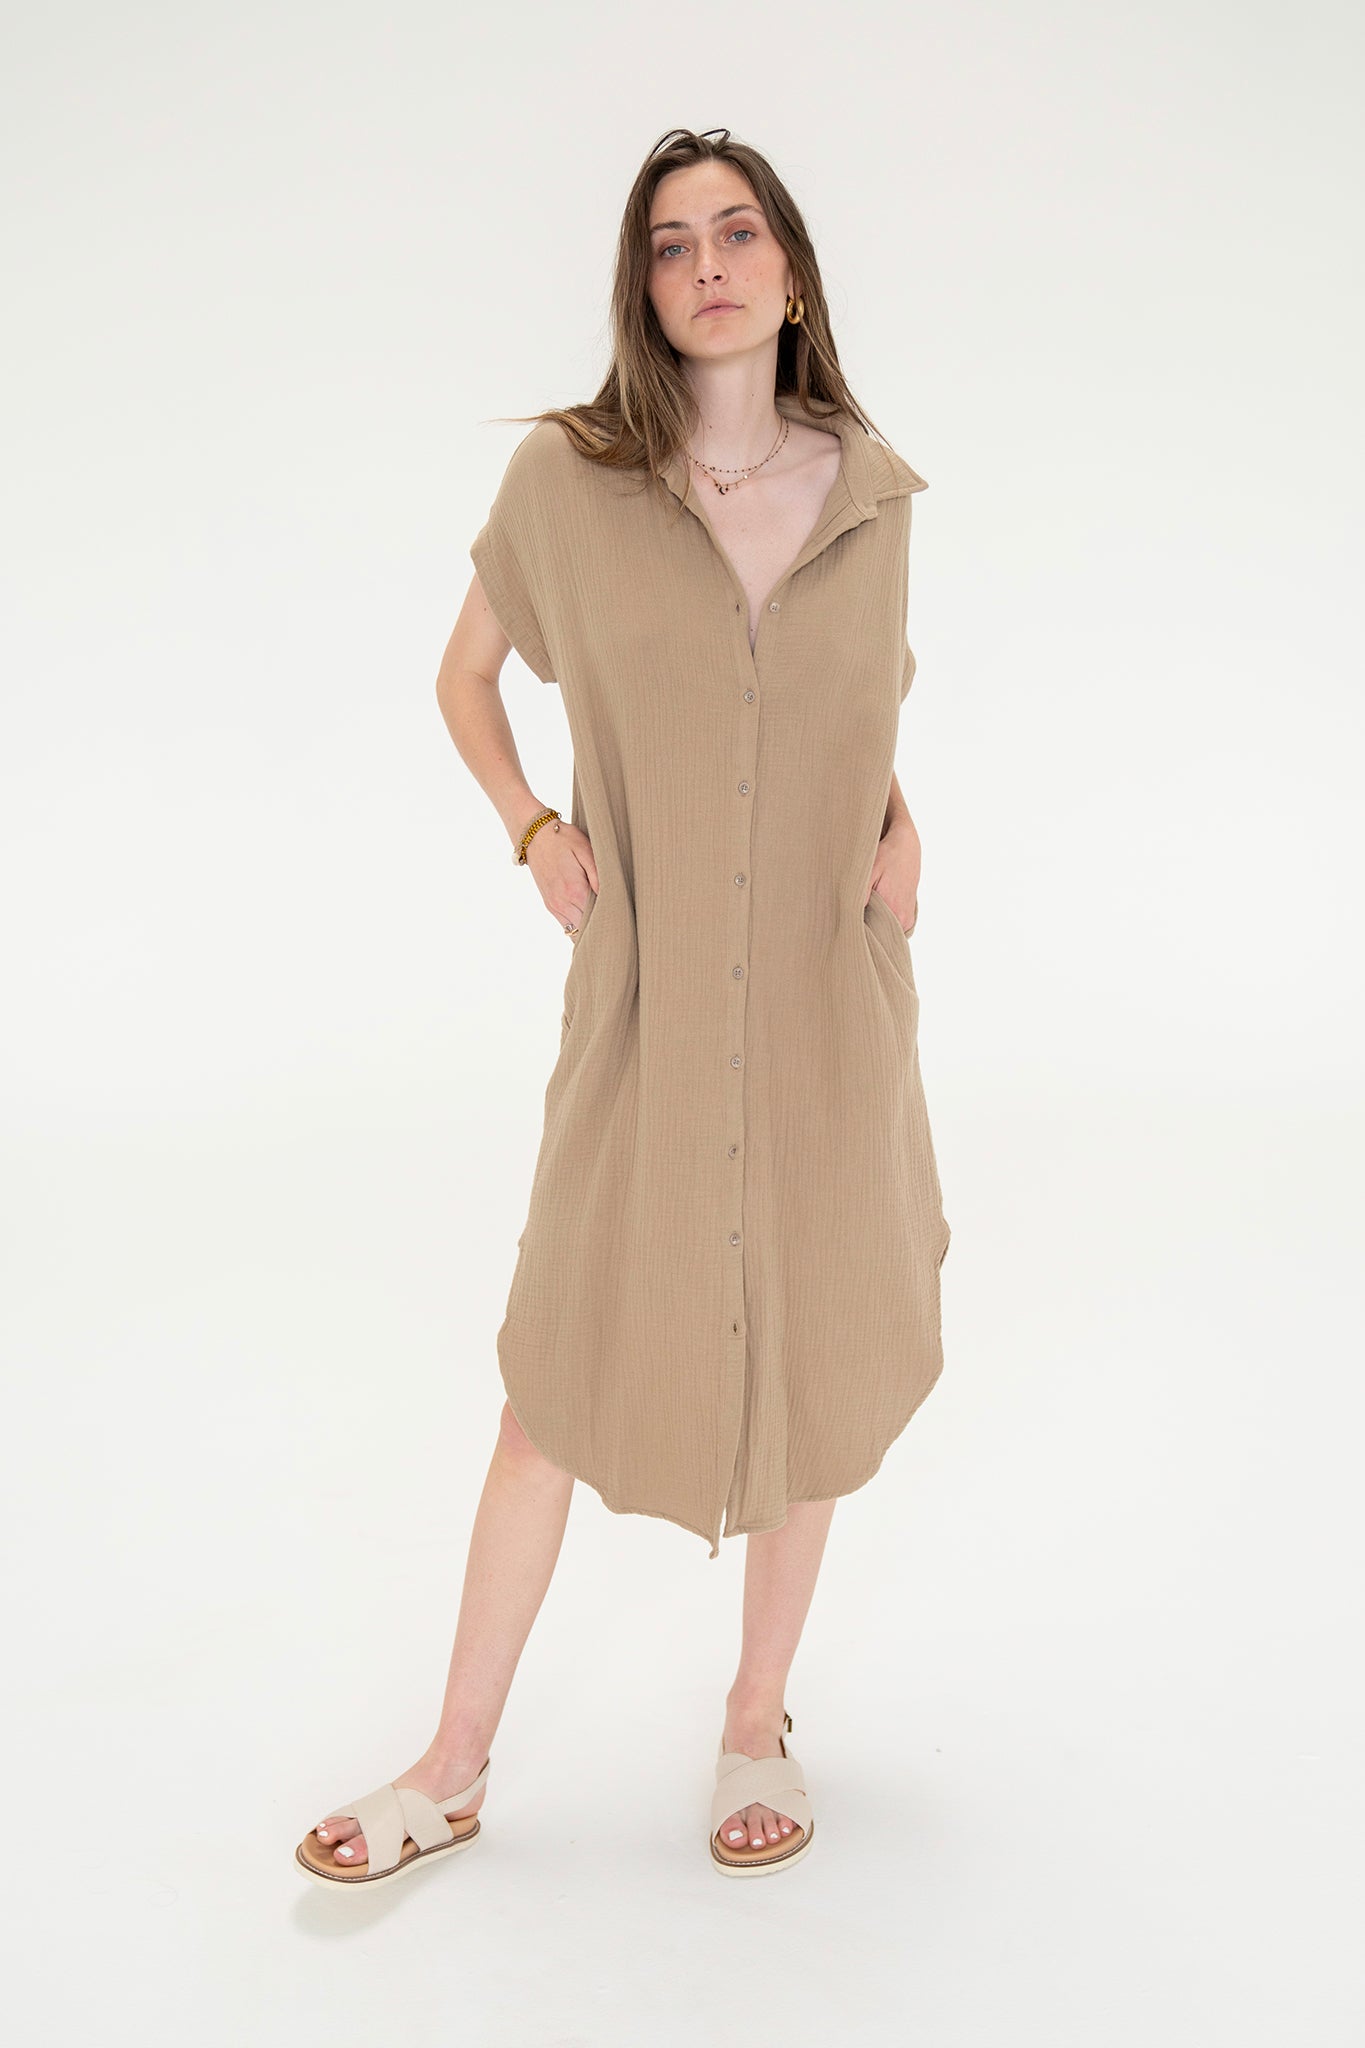 View 1 of Ferlo Maxi Shirt Dress, a Dresses from Larrea Cove. Detail: Are you looking for an effortless, relaxe...